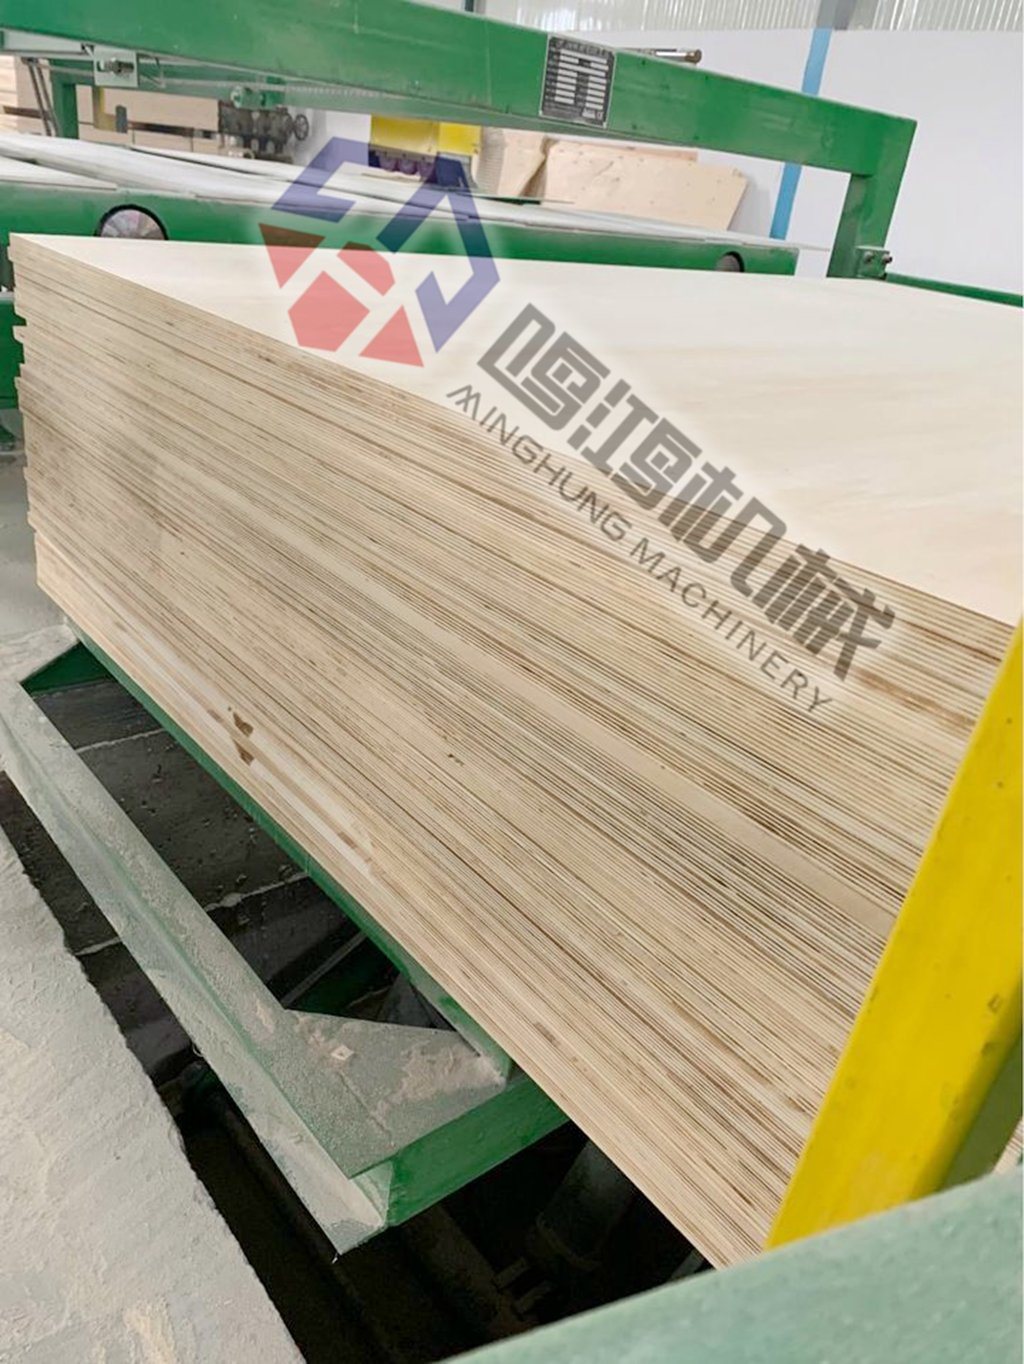 Plywood Double Sizer for Plywood Production